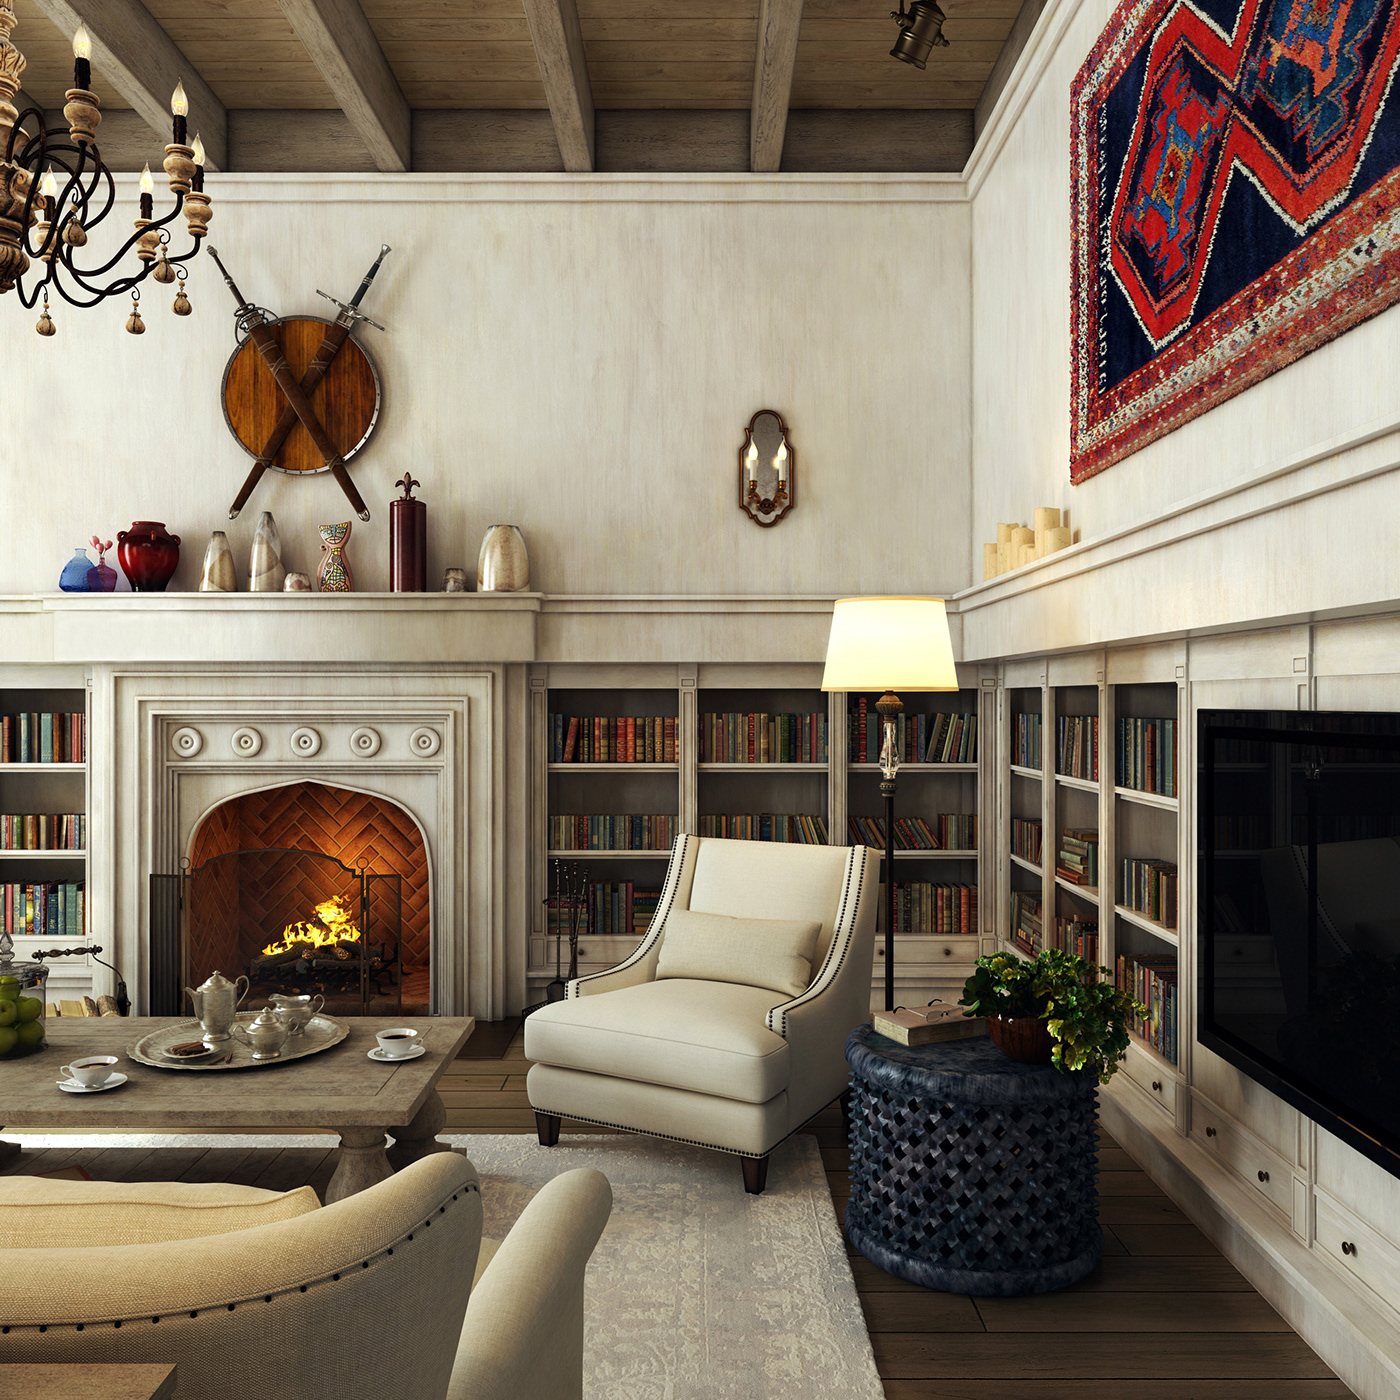 Colonial style Ethnic fireplace library natural materials 3ds max architecture interior design  living room vray